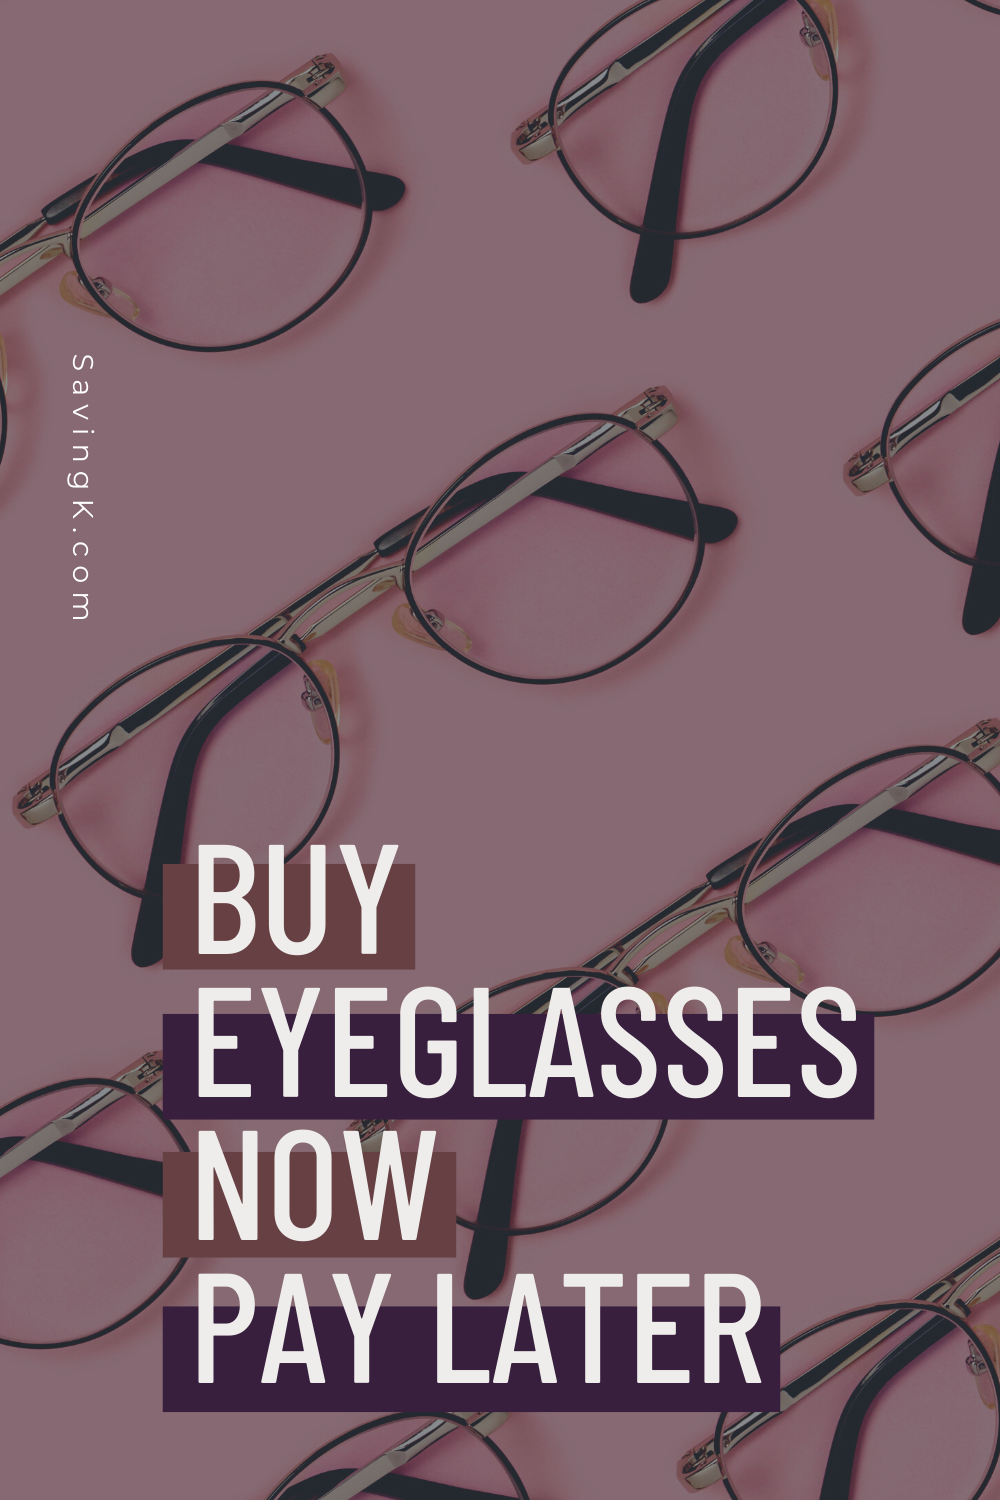 Buy Eyeglasses Now, Pay Later